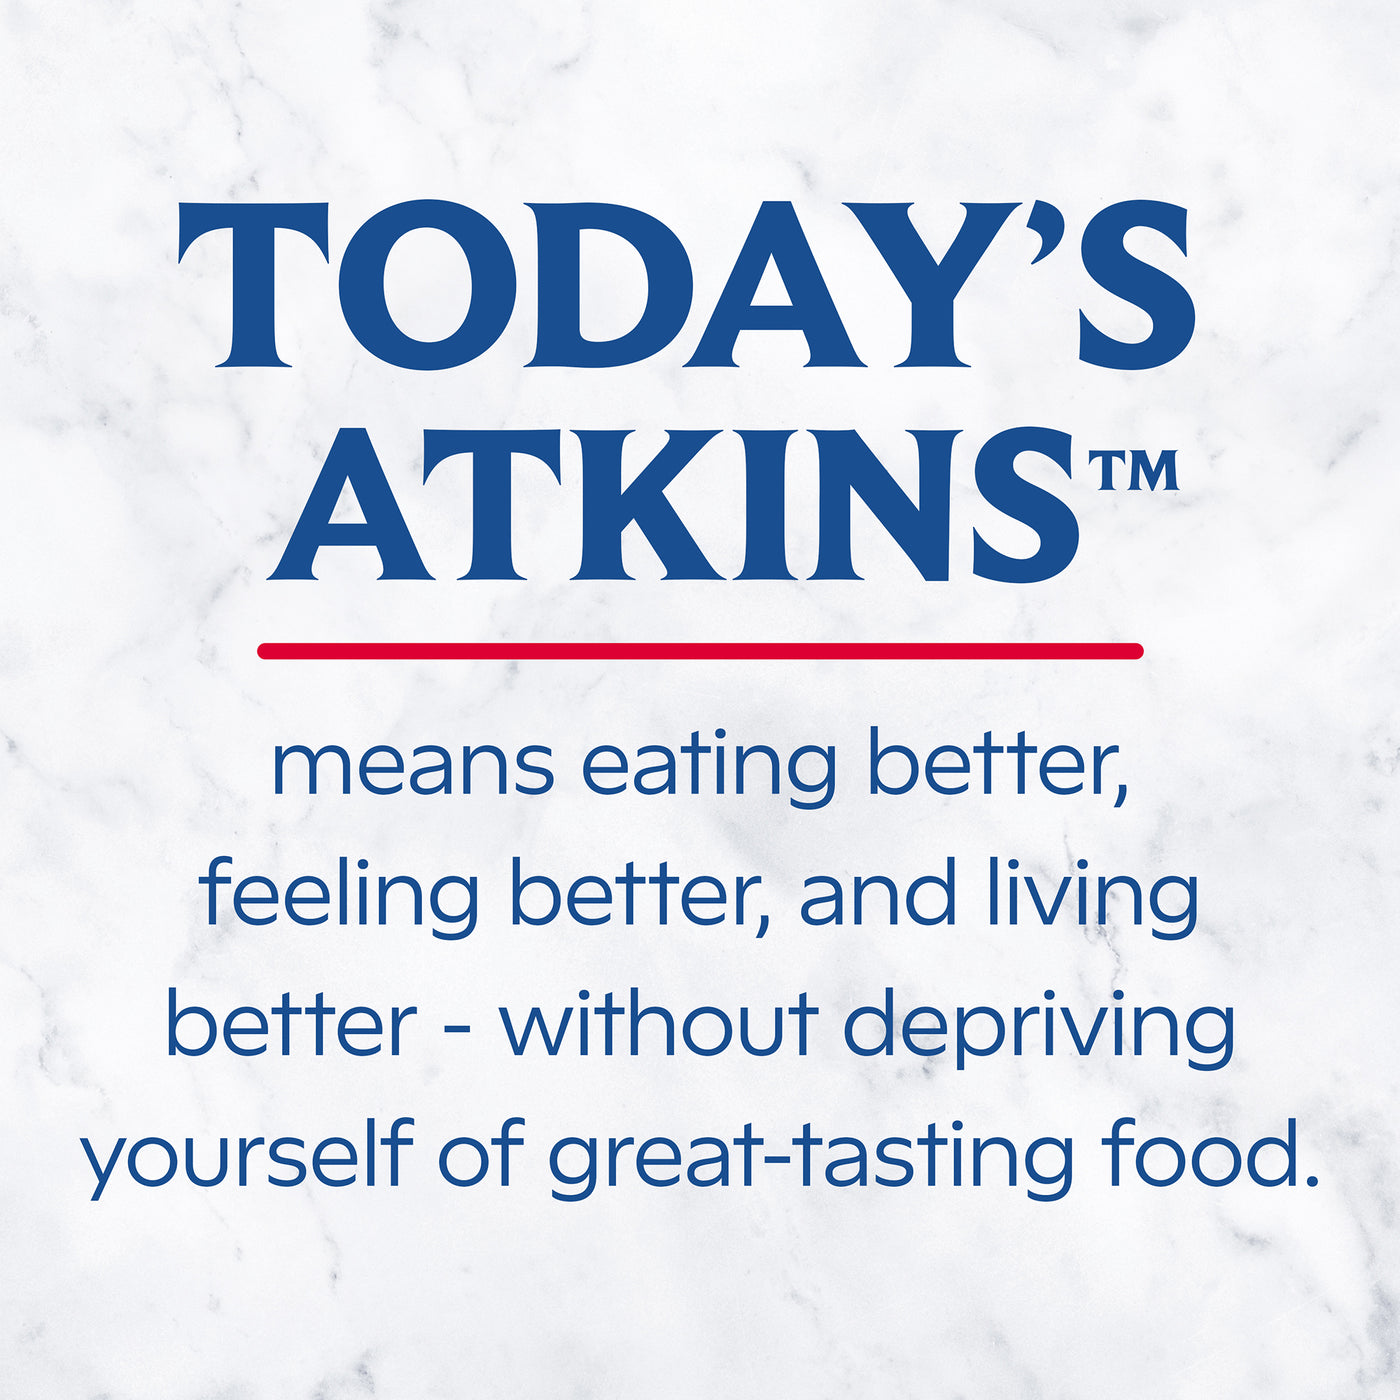 Snickerdoodle Bite-Sized Crunchy Protein Cookies; Today's Atkins means eating better, feeling better, and living better - without depriving yourself of great-tasting food.